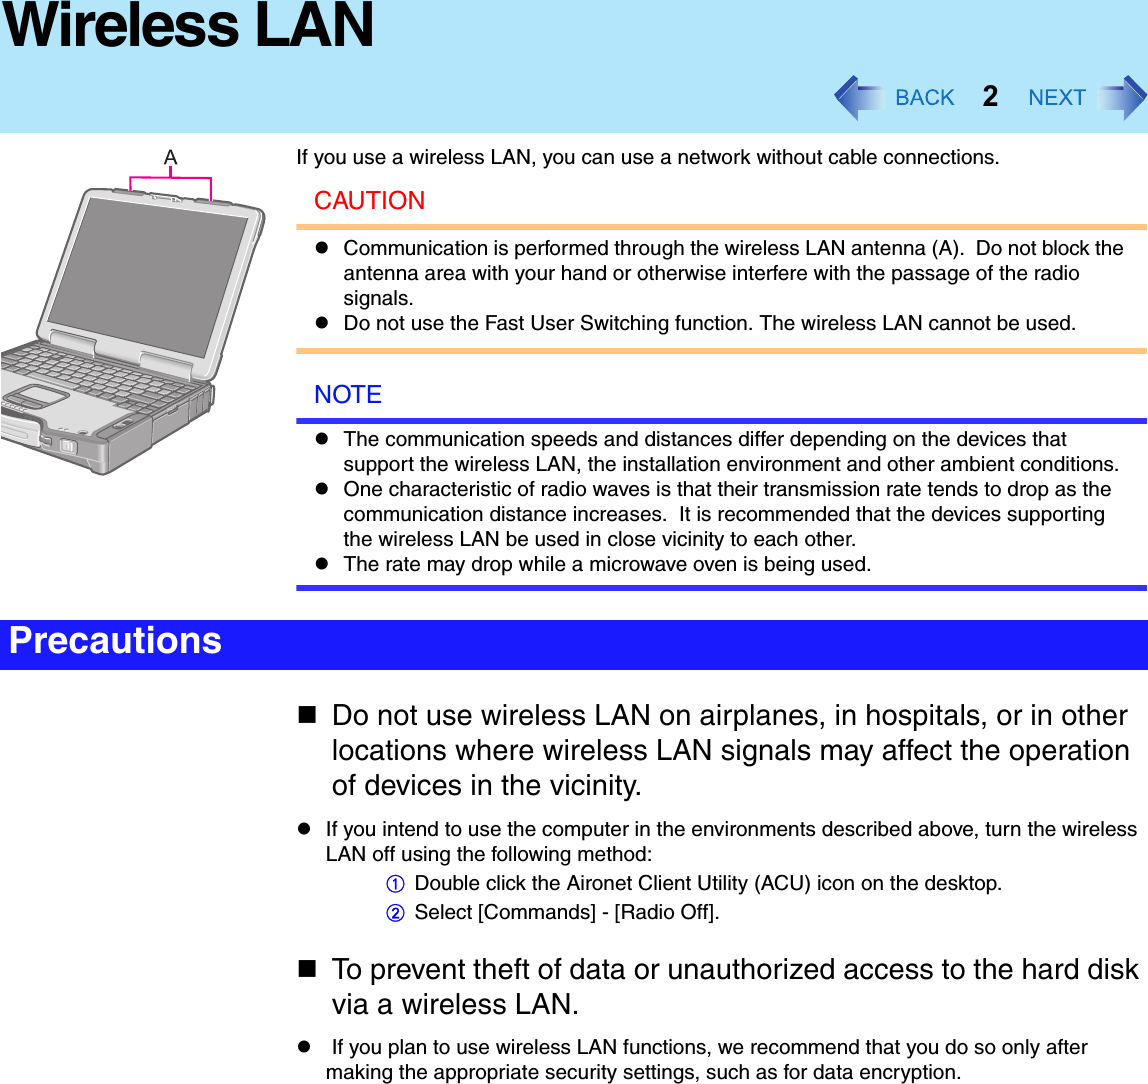 2Wireless LANIf you use a wireless LAN, you can use a network without cable connections.CAUTIONzCommunication is performed through the wireless LAN antenna (A).  Do not block the antenna area with your hand or otherwise interfere with the passage of the radio signals.zDo not use the Fast User Switching function. The wireless LAN cannot be used.NOTEzThe communication speeds and distances differ depending on the devices that support the wireless LAN, the installation environment and other ambient conditions.zOne characteristic of radio waves is that their transmission rate tends to drop as the communication distance increases.  It is recommended that the devices supporting the wireless LAN be used in close vicinity to each other.zThe rate may drop while a microwave oven is being used.Do not use wireless LAN on airplanes, in hospitals, or in other locations where wireless LAN signals may affect the operation of devices in the vicinity.zIf you intend to use the computer in the environments described above, turn the wireless LAN off using the following method:ADouble click the Aironet Client Utility (ACU) icon on the desktop.BSelect [Commands] - [Radio Off].To prevent theft of data or unauthorized access to the hard disk via a wireless LAN.z If you plan to use wireless LAN functions, we recommend that you do so only after making the appropriate security settings, such as for data encryption.Precautions